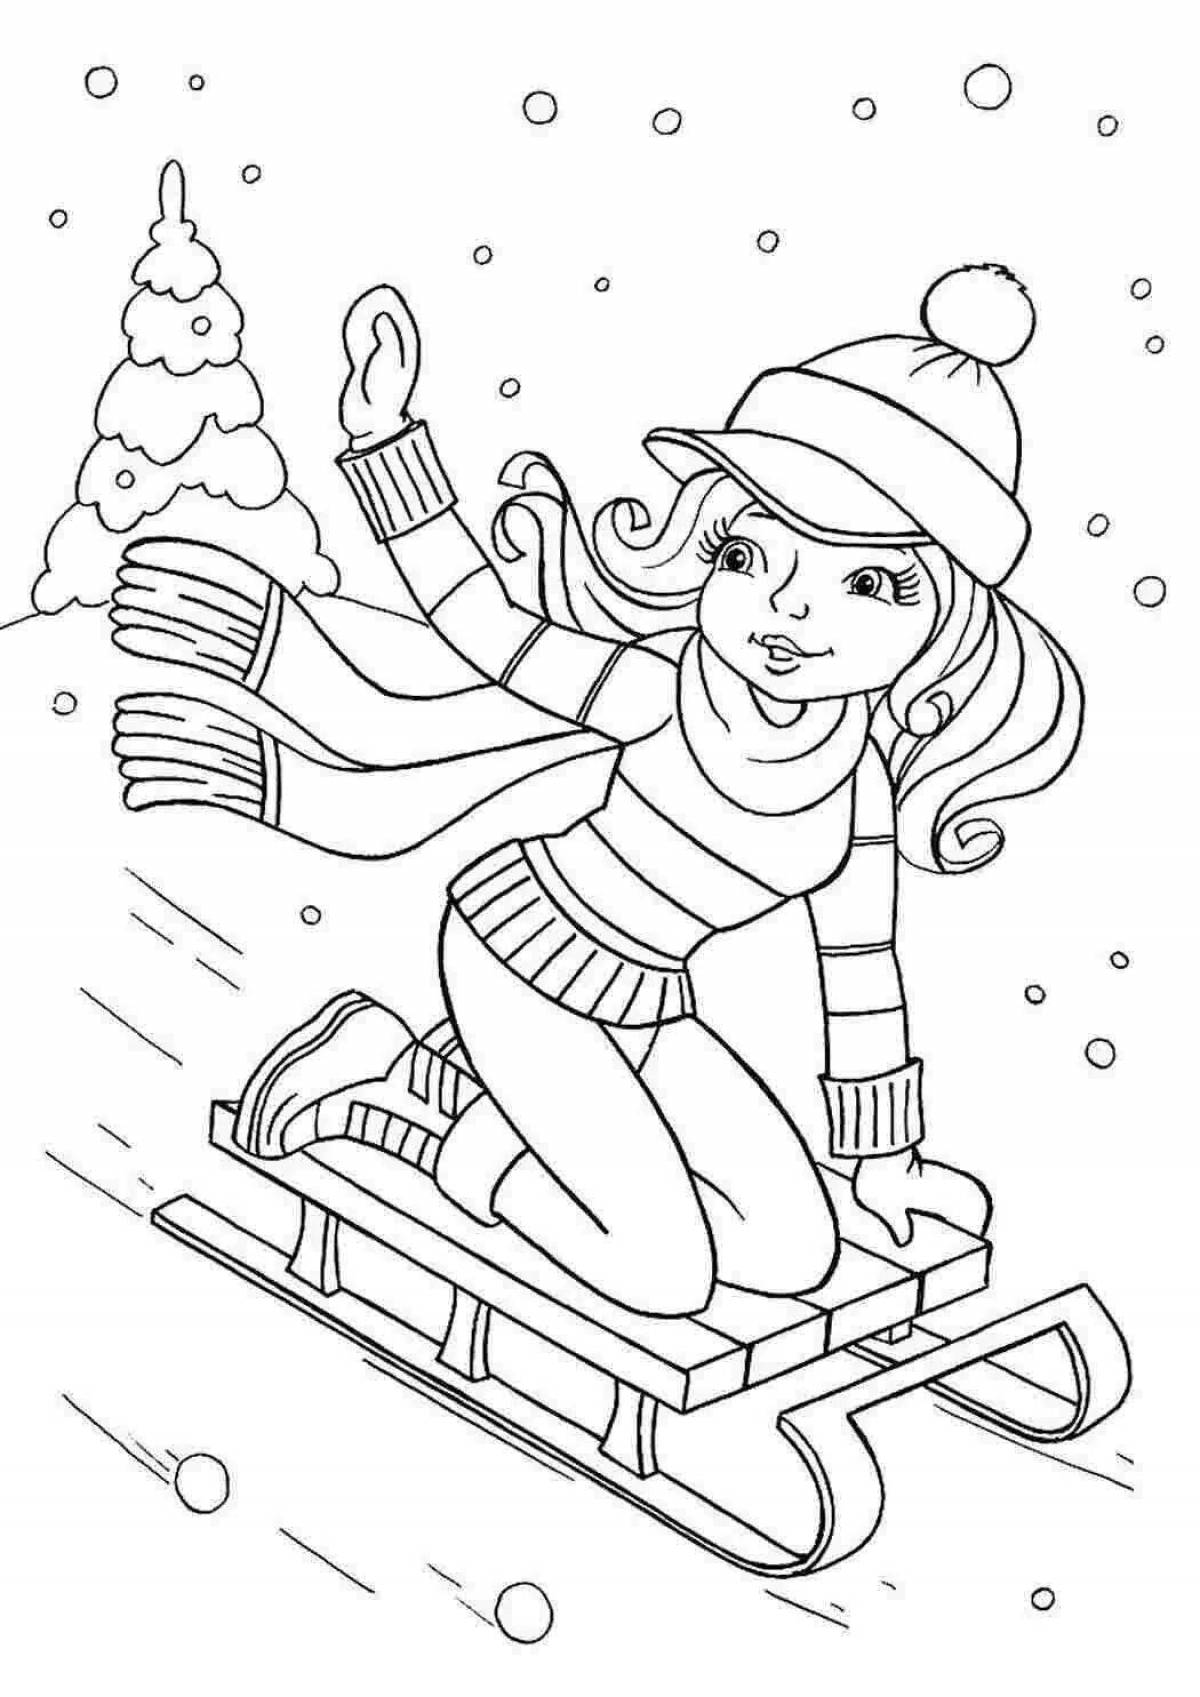 Shiny sled coloring for kids